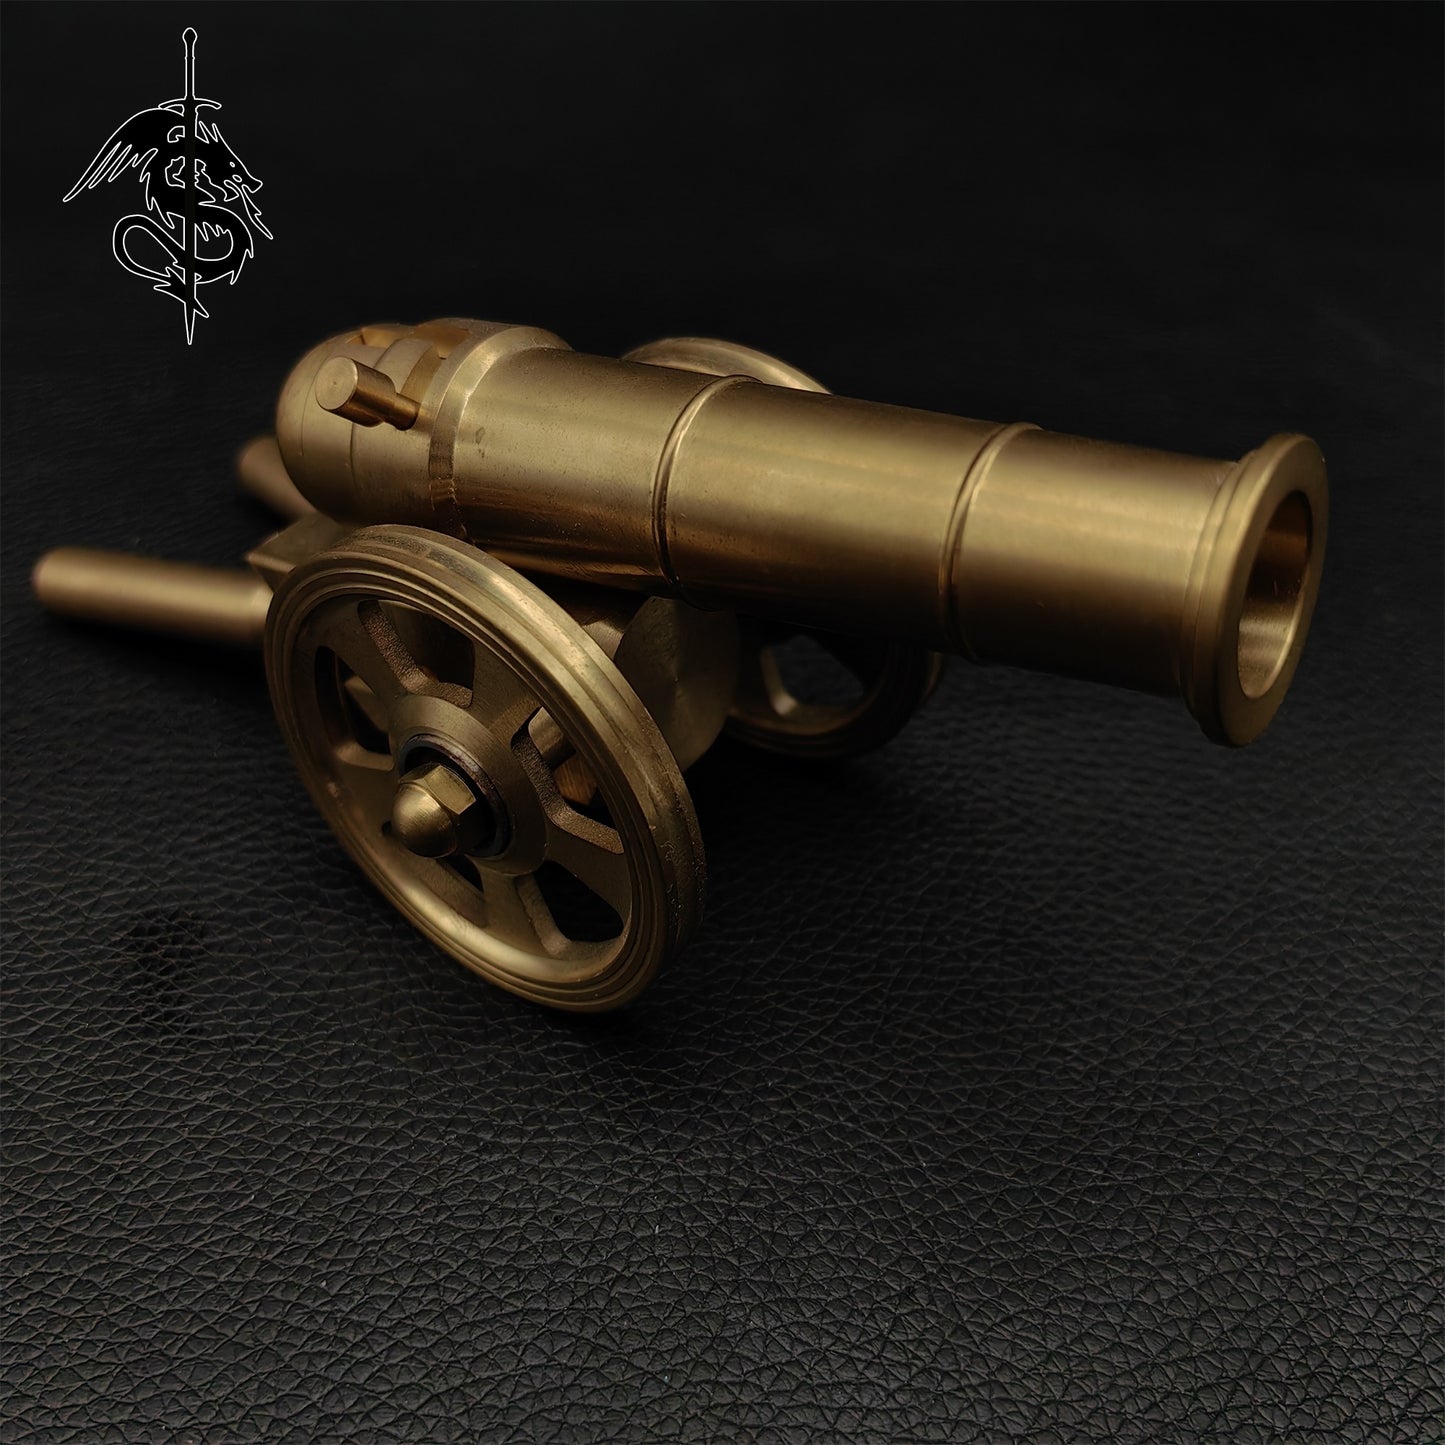 Brass Cannon Miniature Smoothbore Toy Cannon